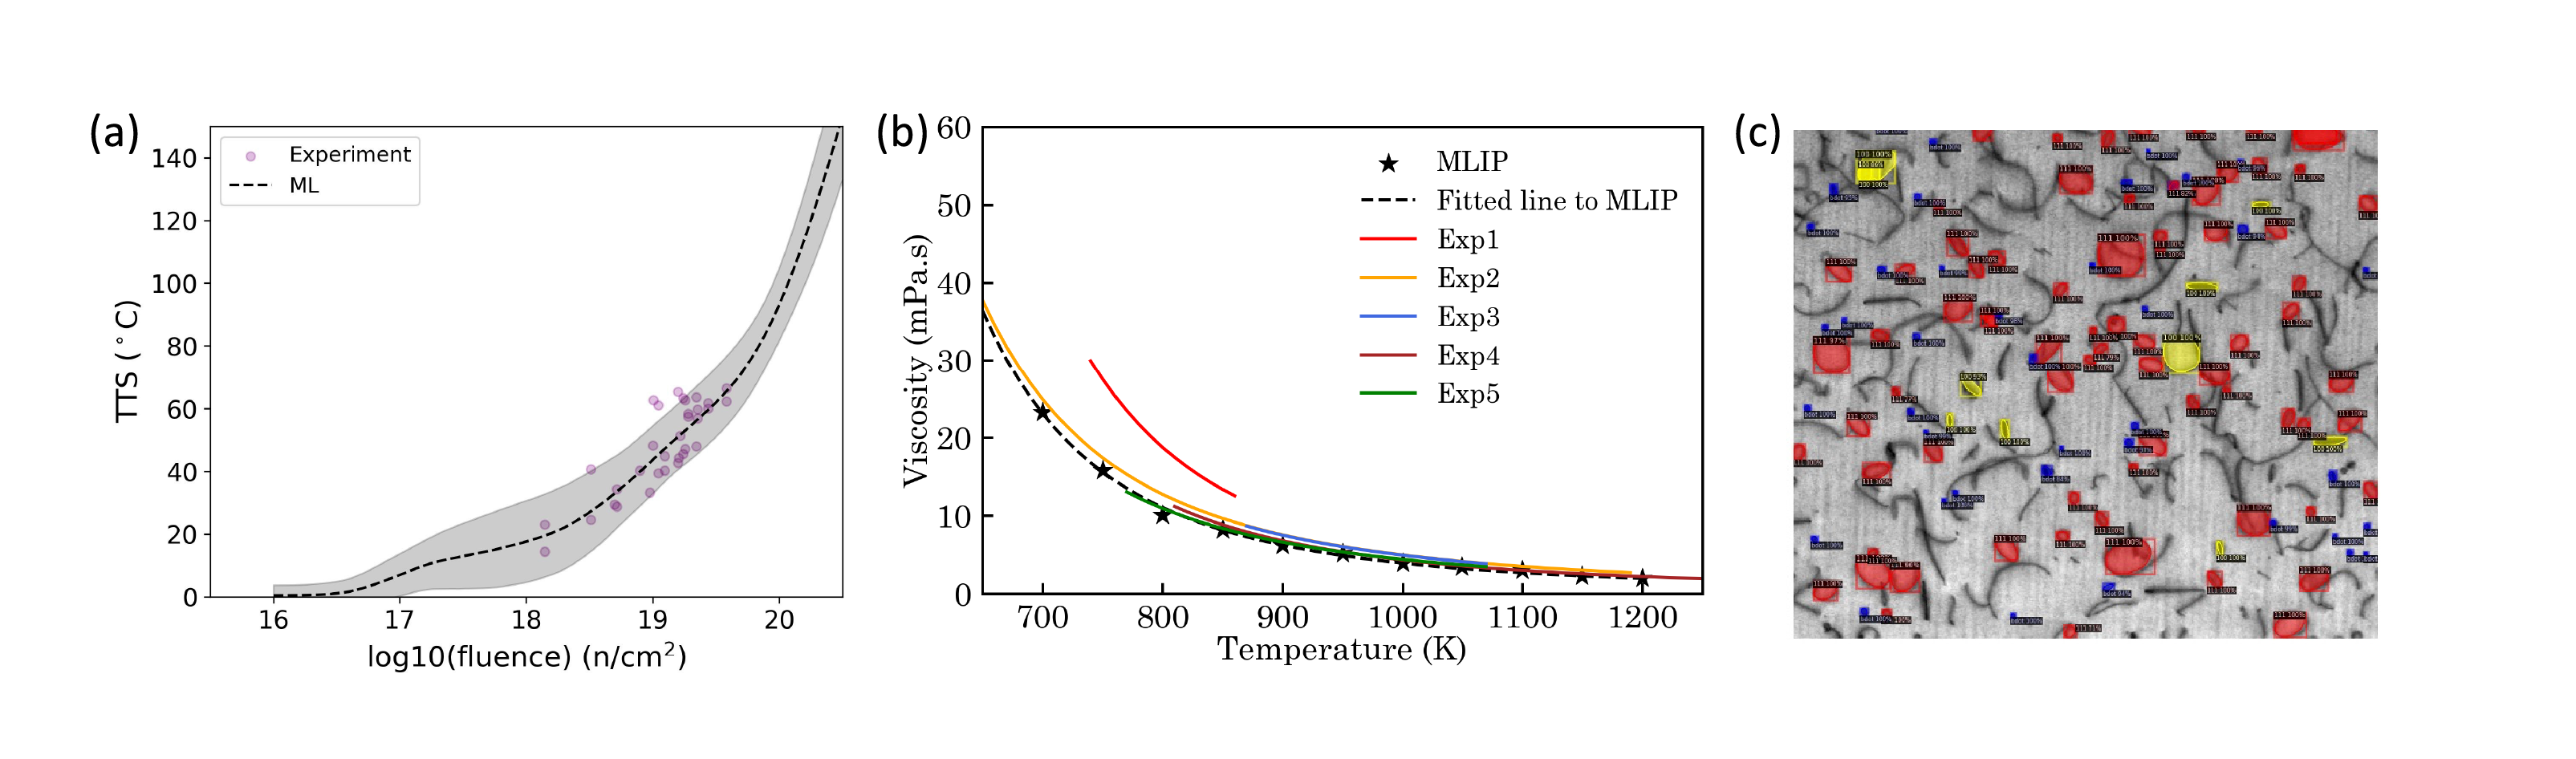 Figure 2: Prediction of (a) radiation embrittlement driven temperature shift in an irradiated steel (image made from similar models to those in Liu, et al.(3)), (b) molten salt viscosity (modified from original image in Attarian, et al.(4)), (c) locations of defects in an irradiated steel (reprinted from Jacobs, et al.(5)).